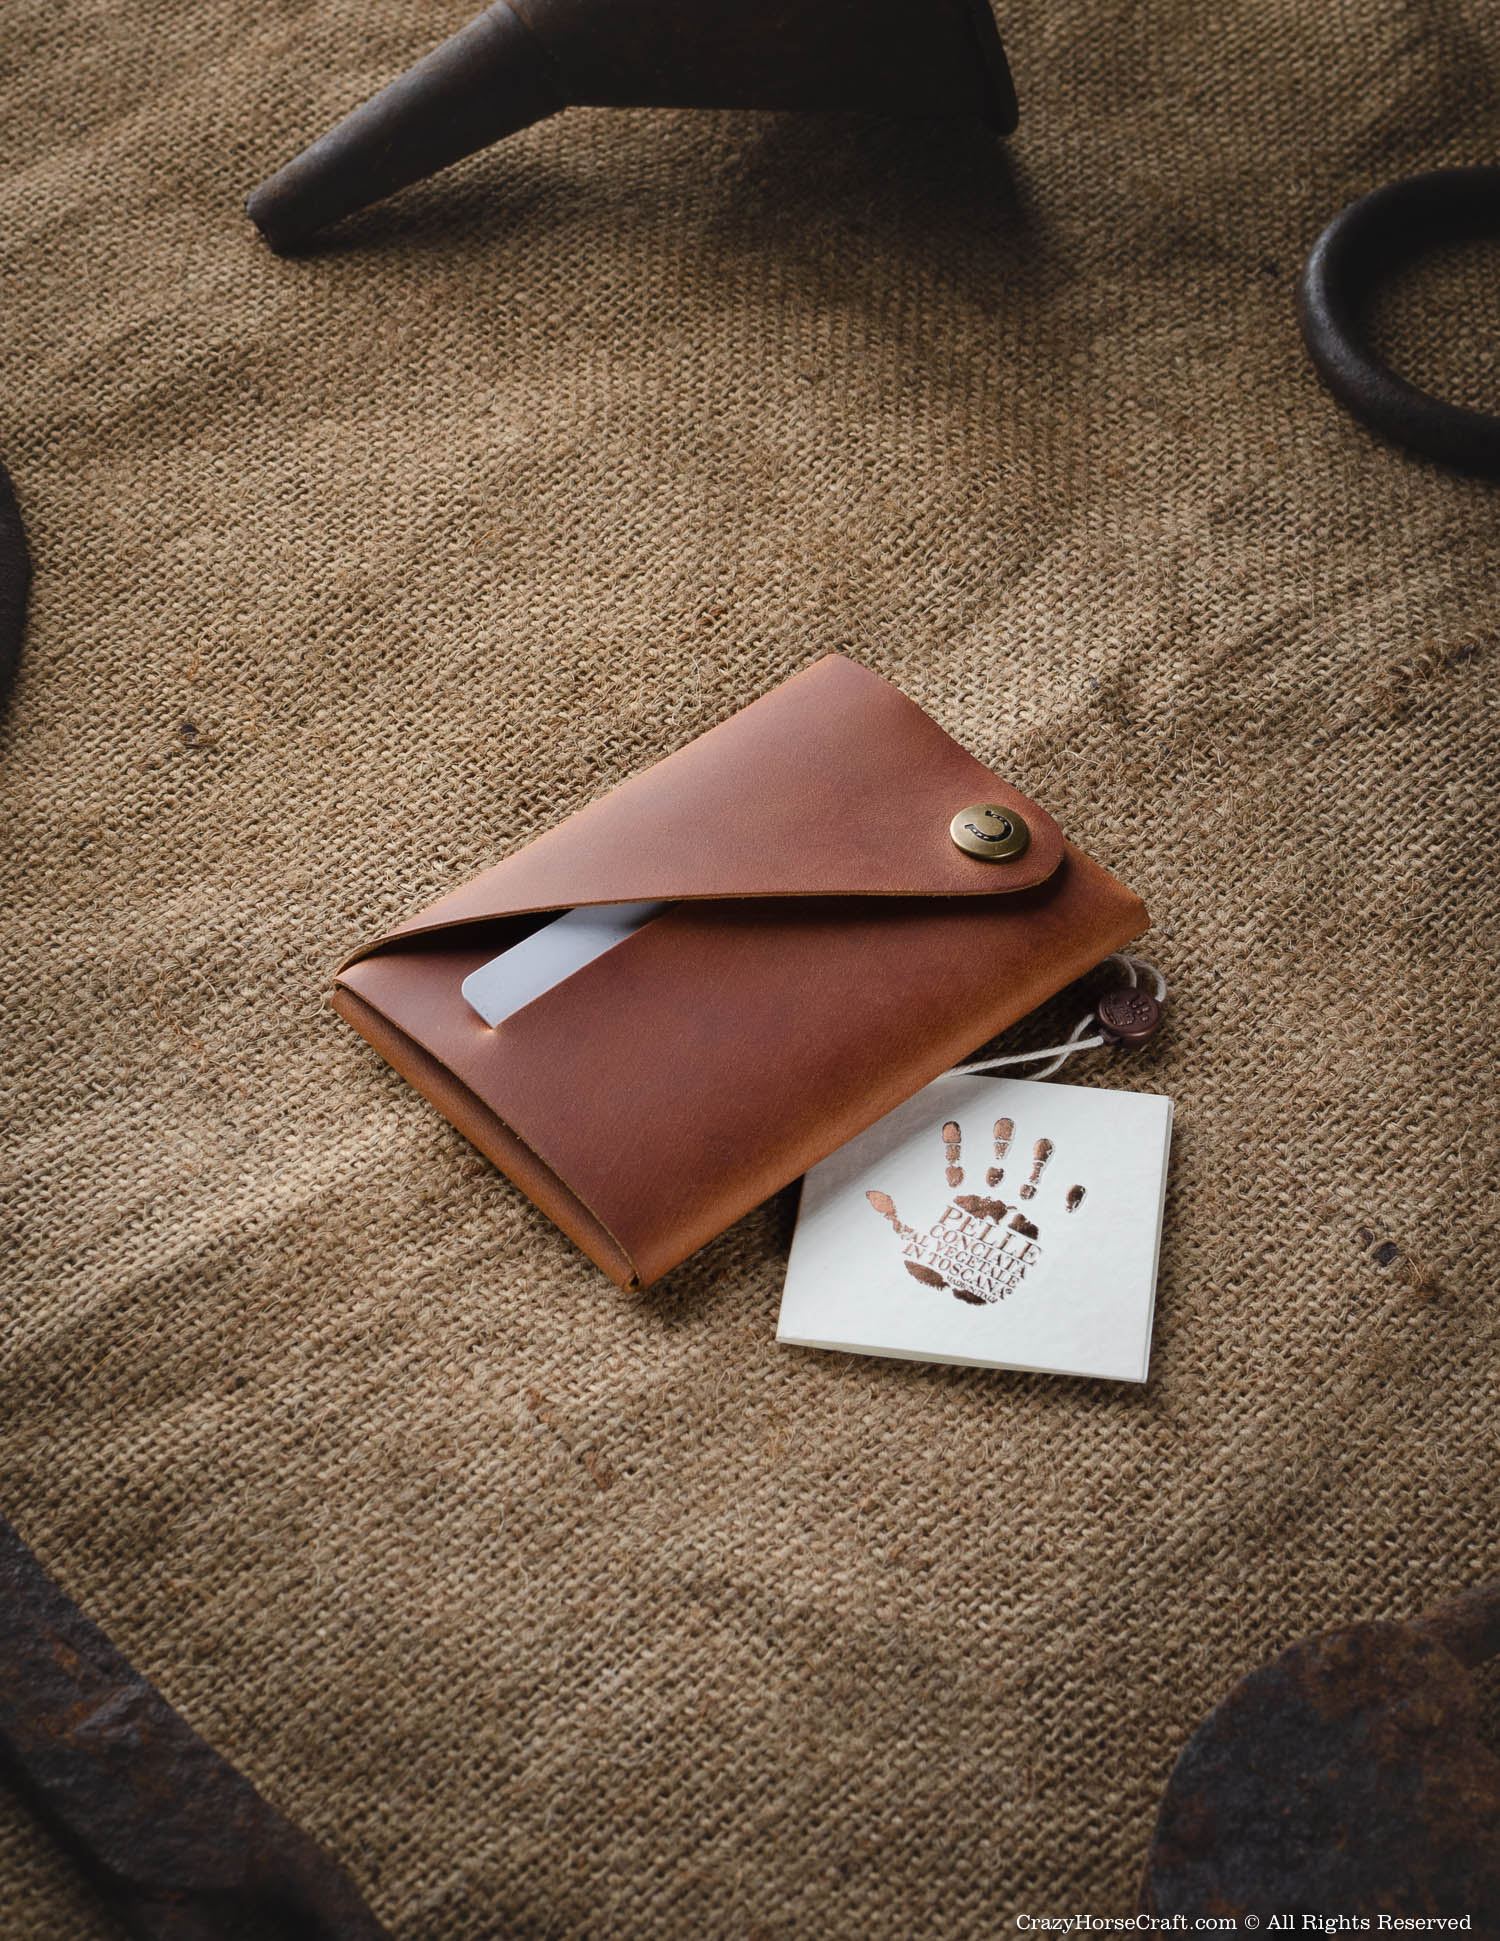 Minimalistic leather wallet/card holder